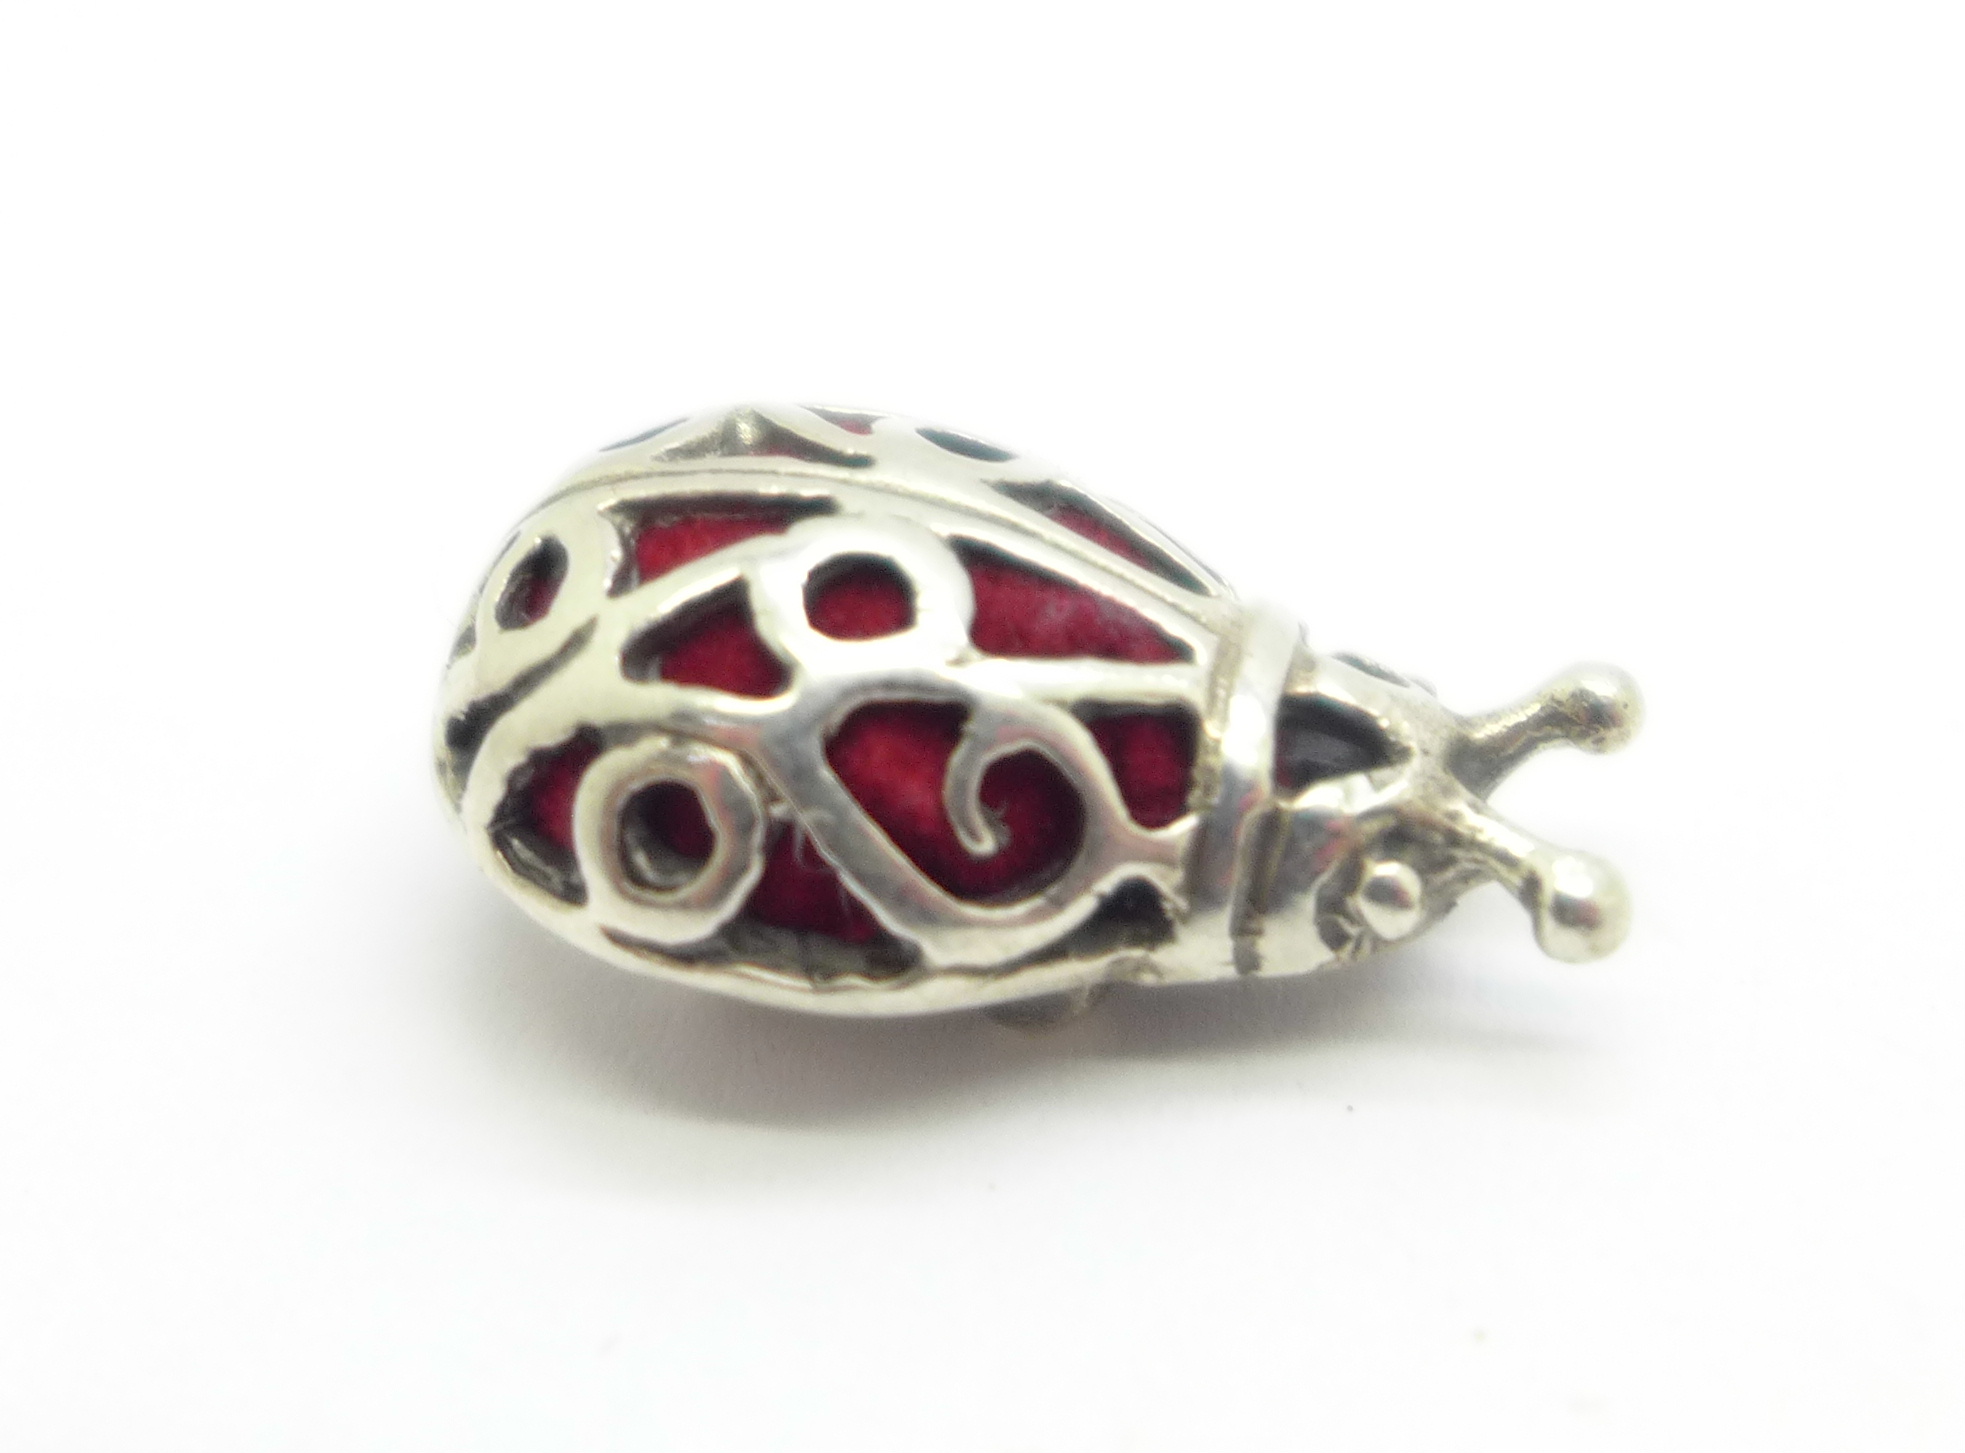 A small novelty sterling silver charm size 'ladybird'